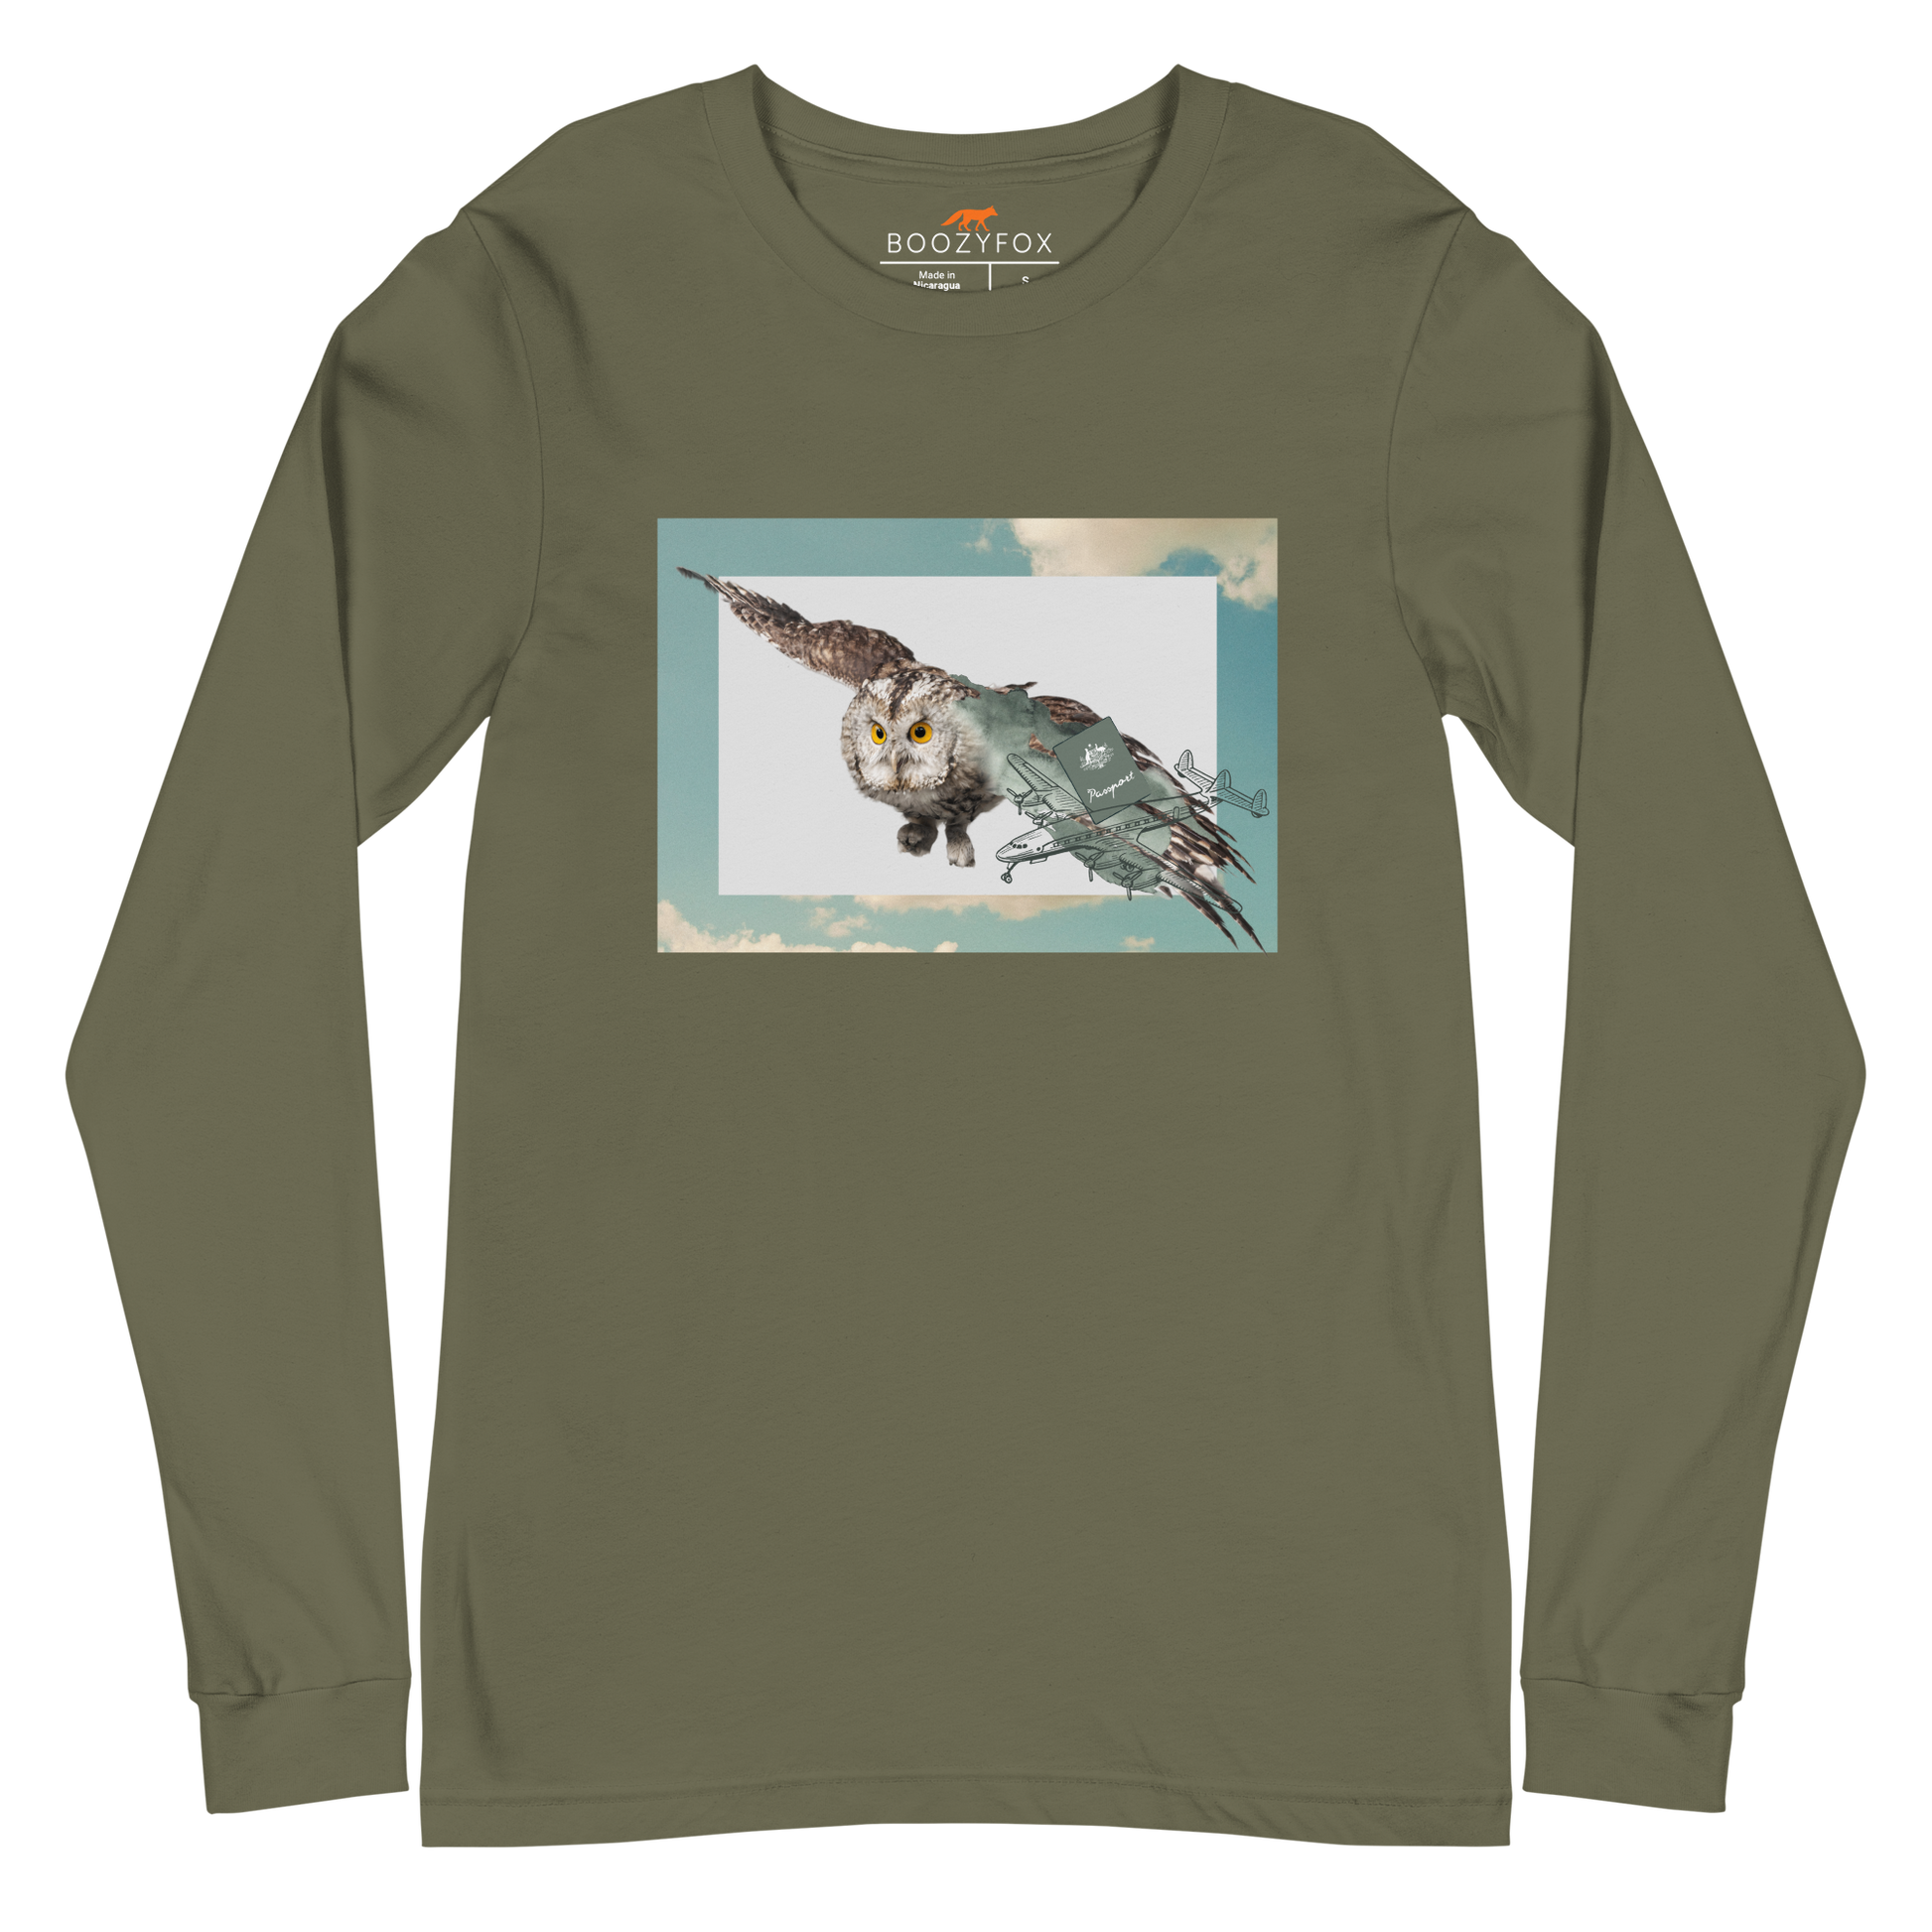 Military Green Owl Long Sleeve Tee featuring a majestic Flying Owl graphic on the chest - Cool Owl Long Sleeve Graphic Tees - Boozy Fox